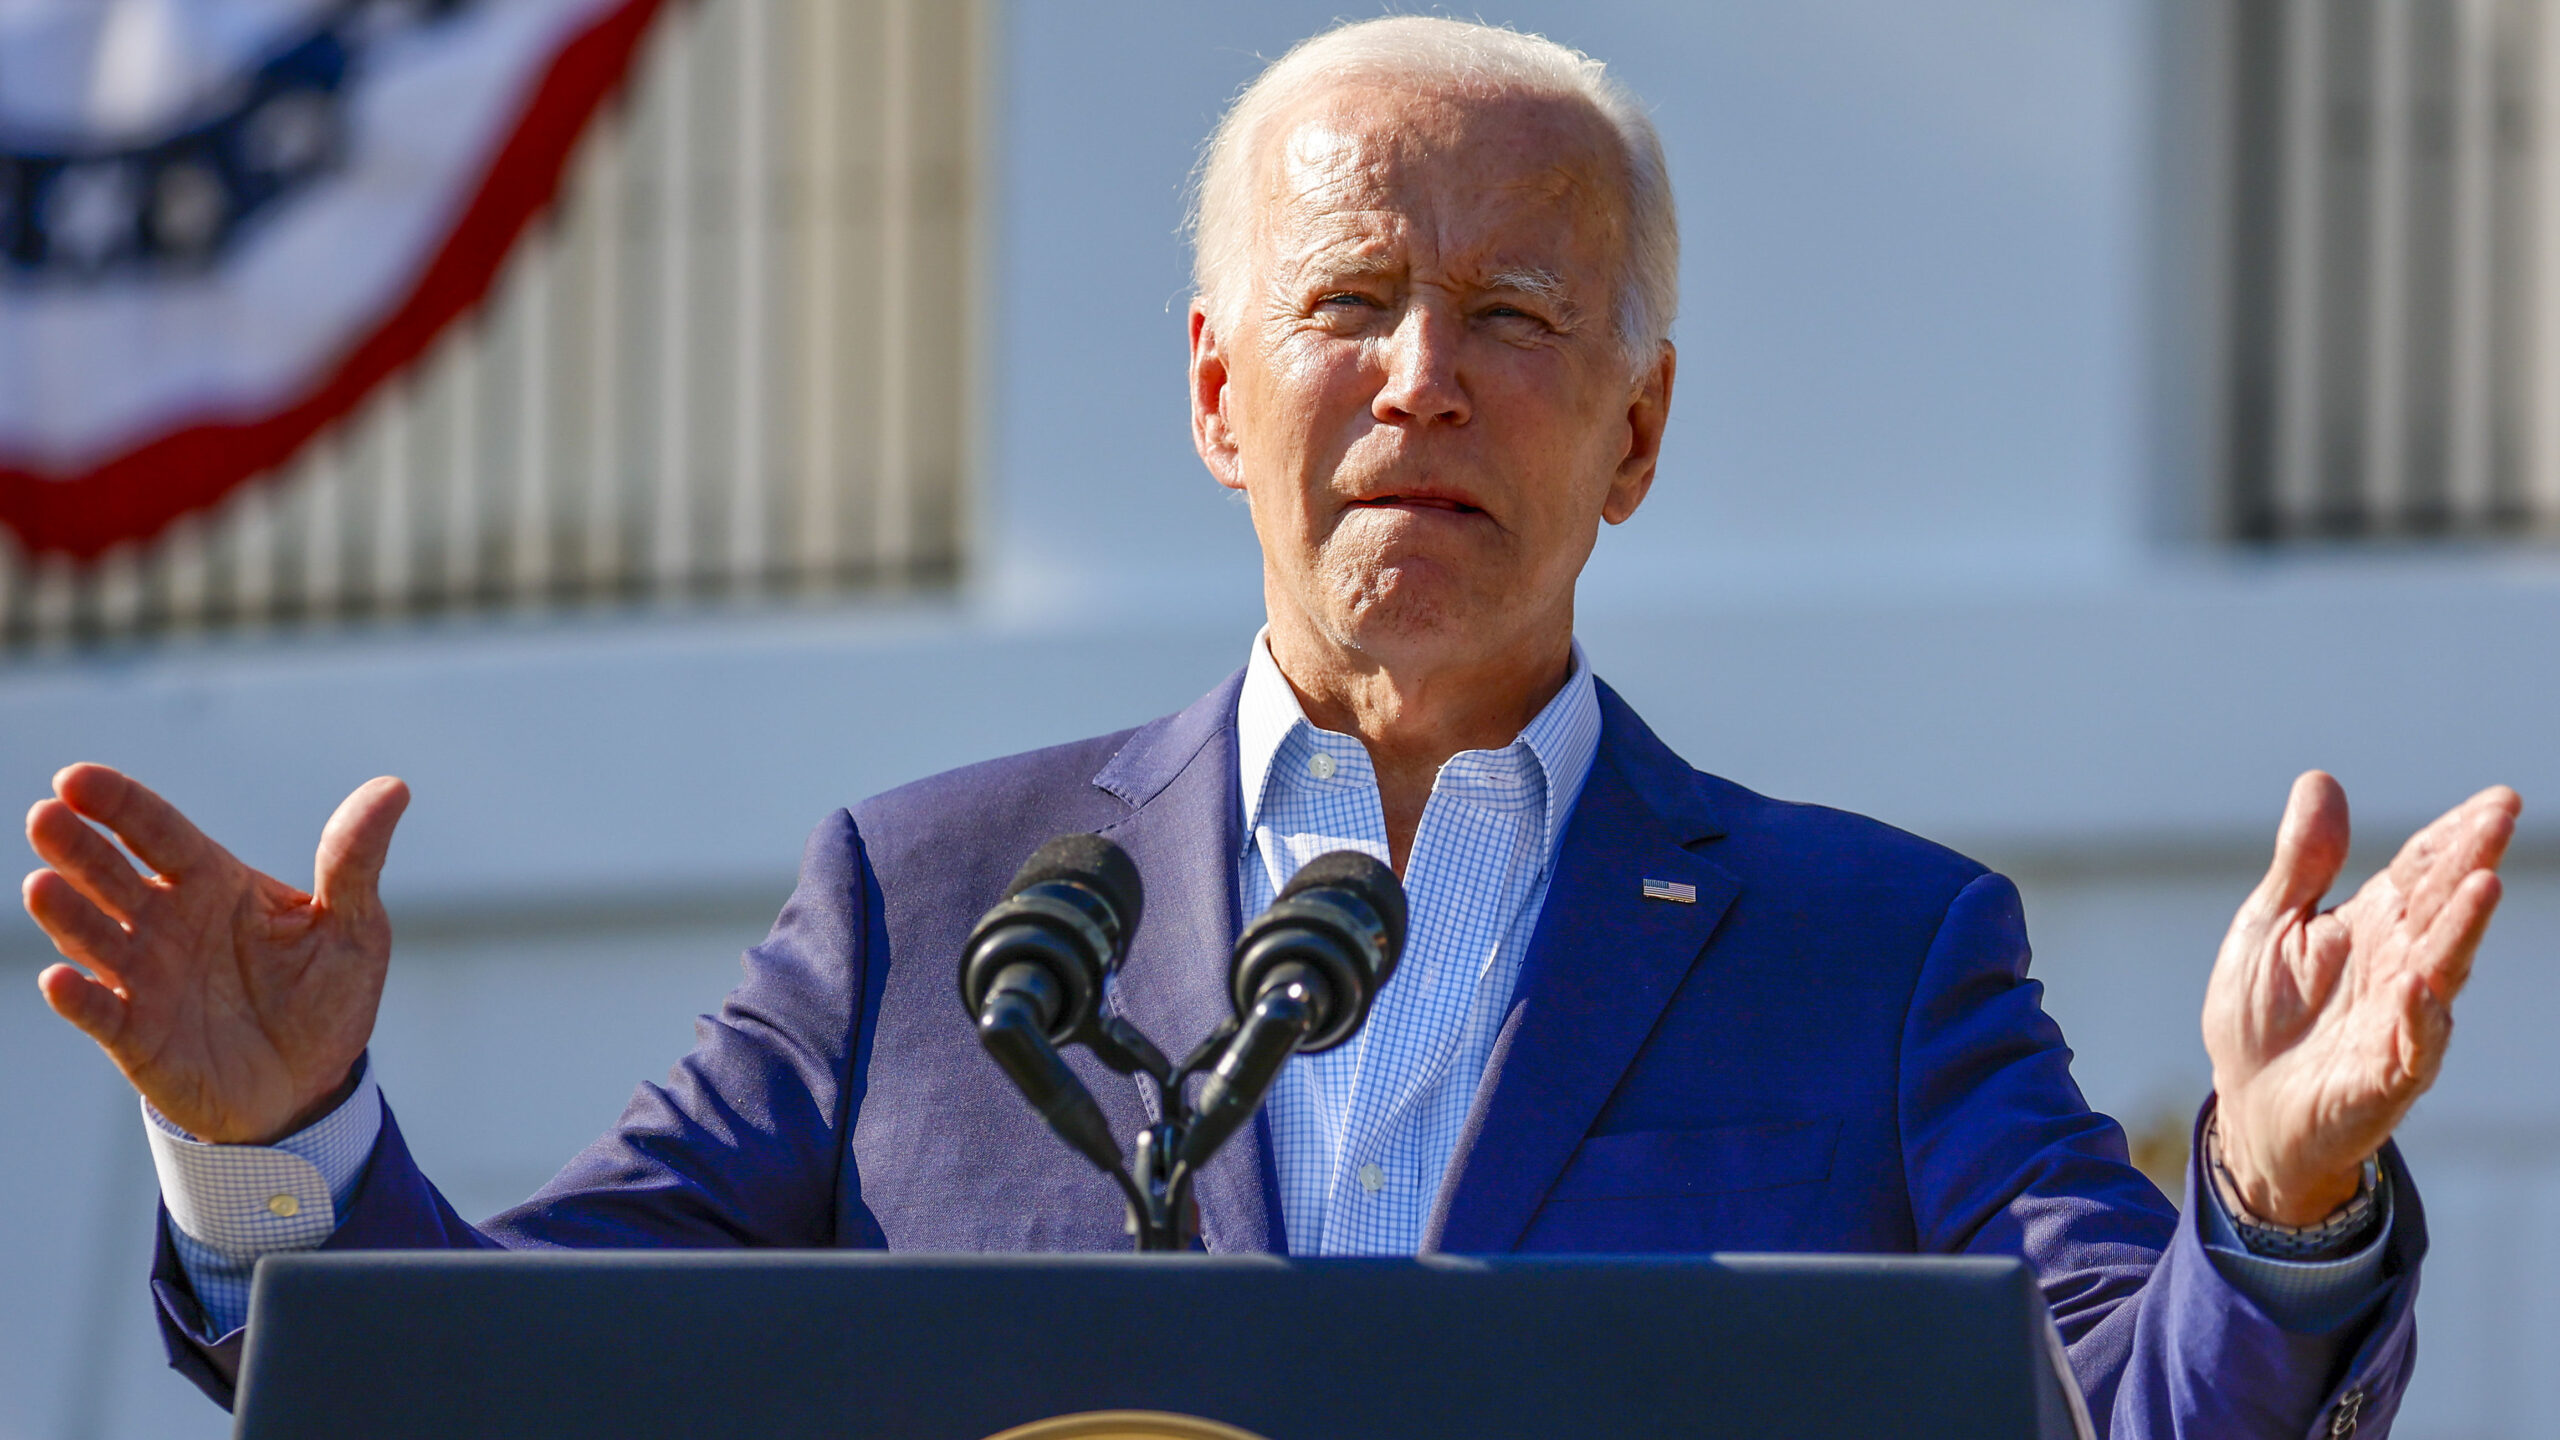 Biden Acknowledges US Is Struggling As His Poll Numbers Plummet This Country Is Moving Backward